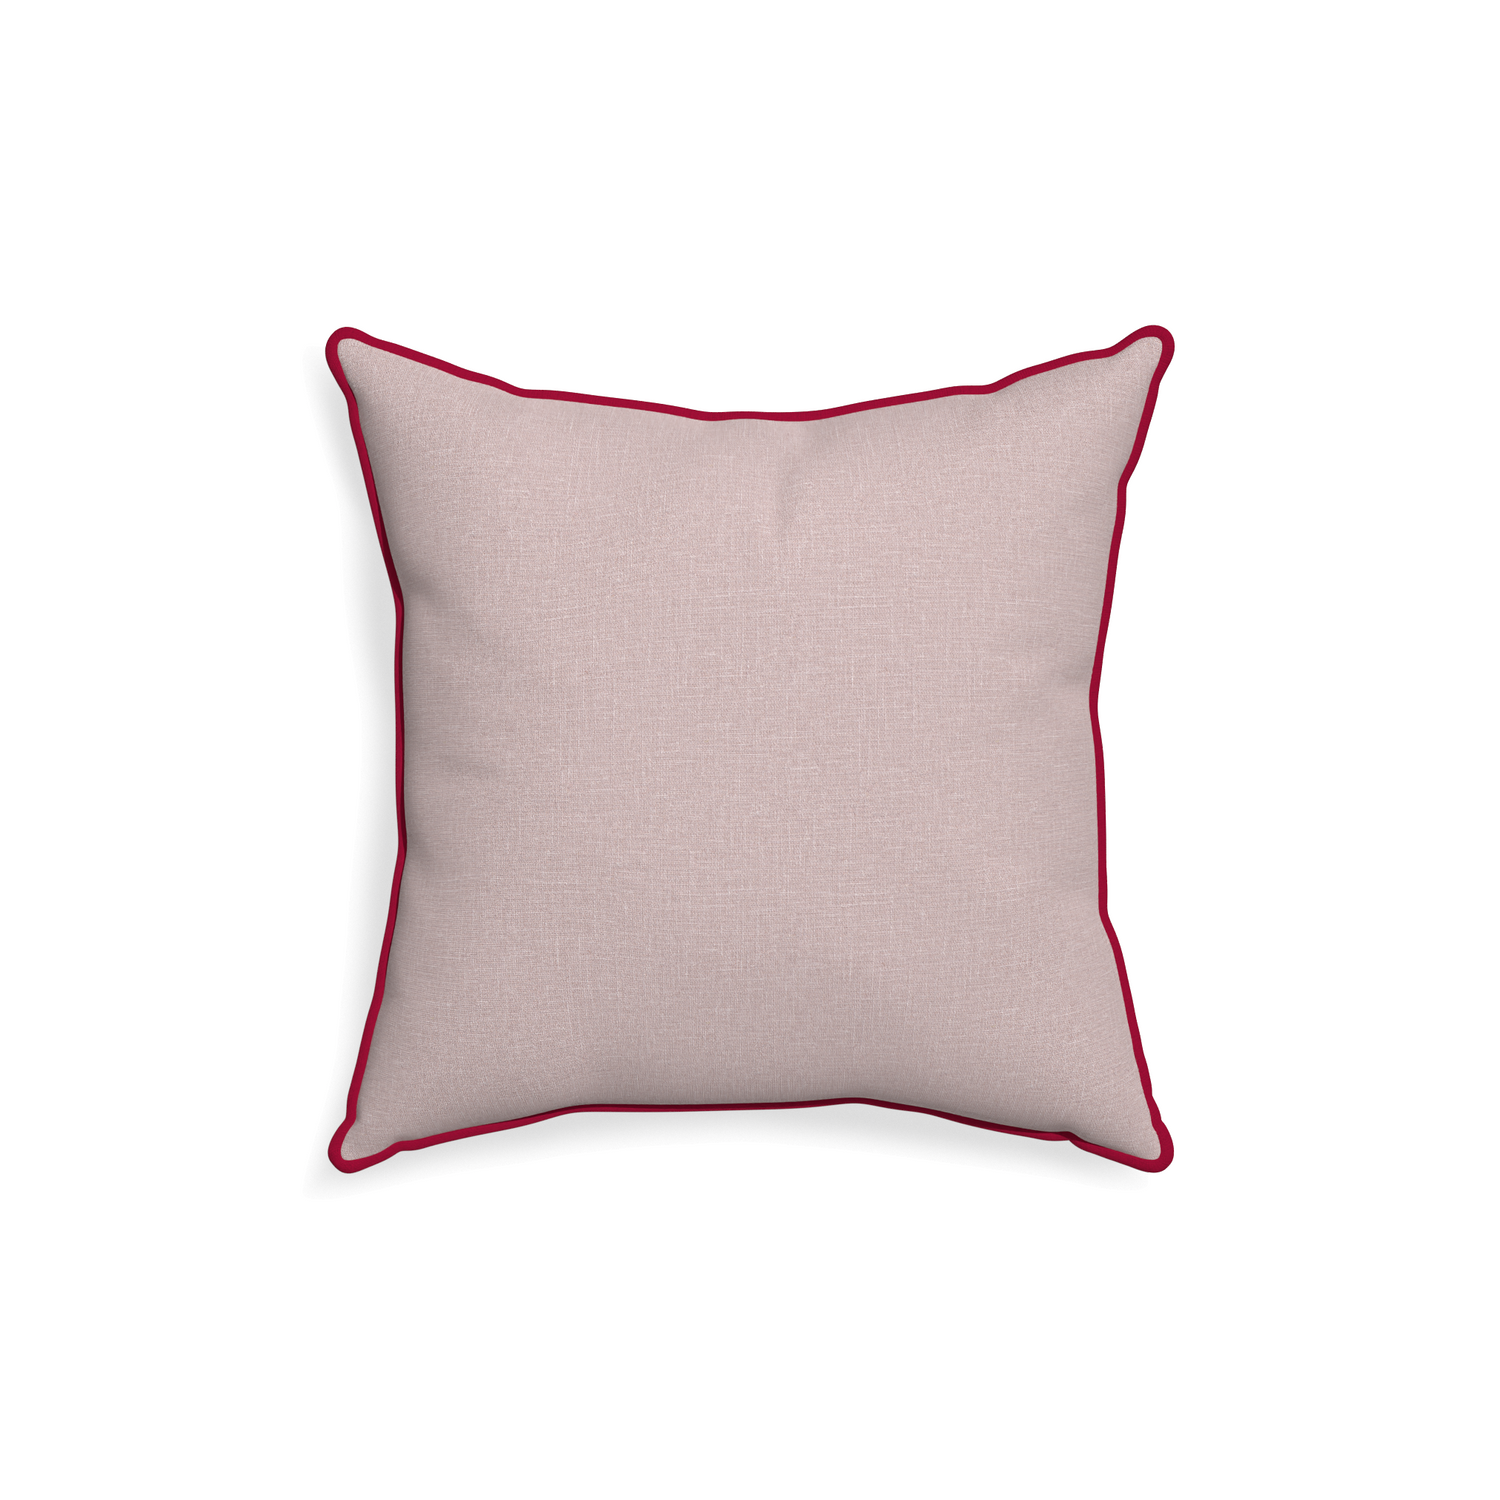 18-square orchid custom mauve pinkpillow with raspberry piping on white background